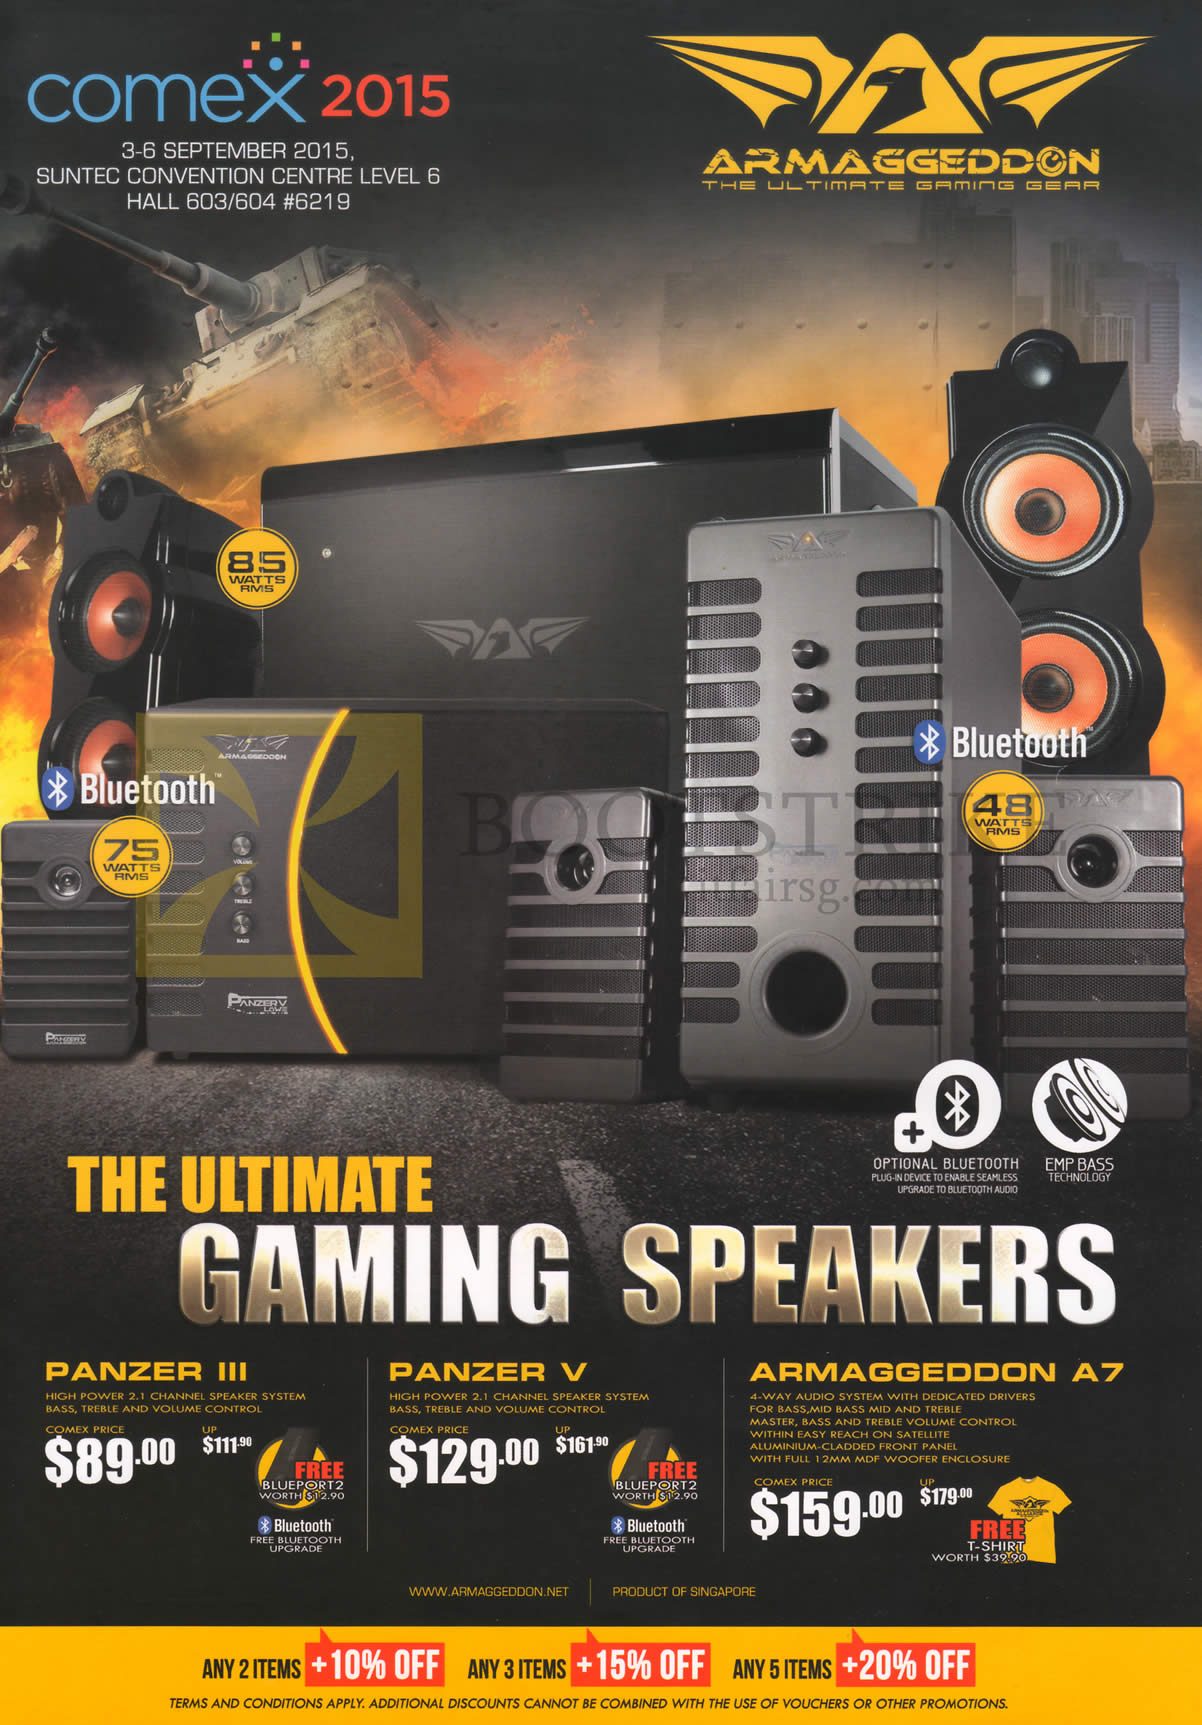 COMEX 2015 price list image brochure of Armaggeddon Gaming Speakers Panzer III, Panzer V, Armaggeddon A7